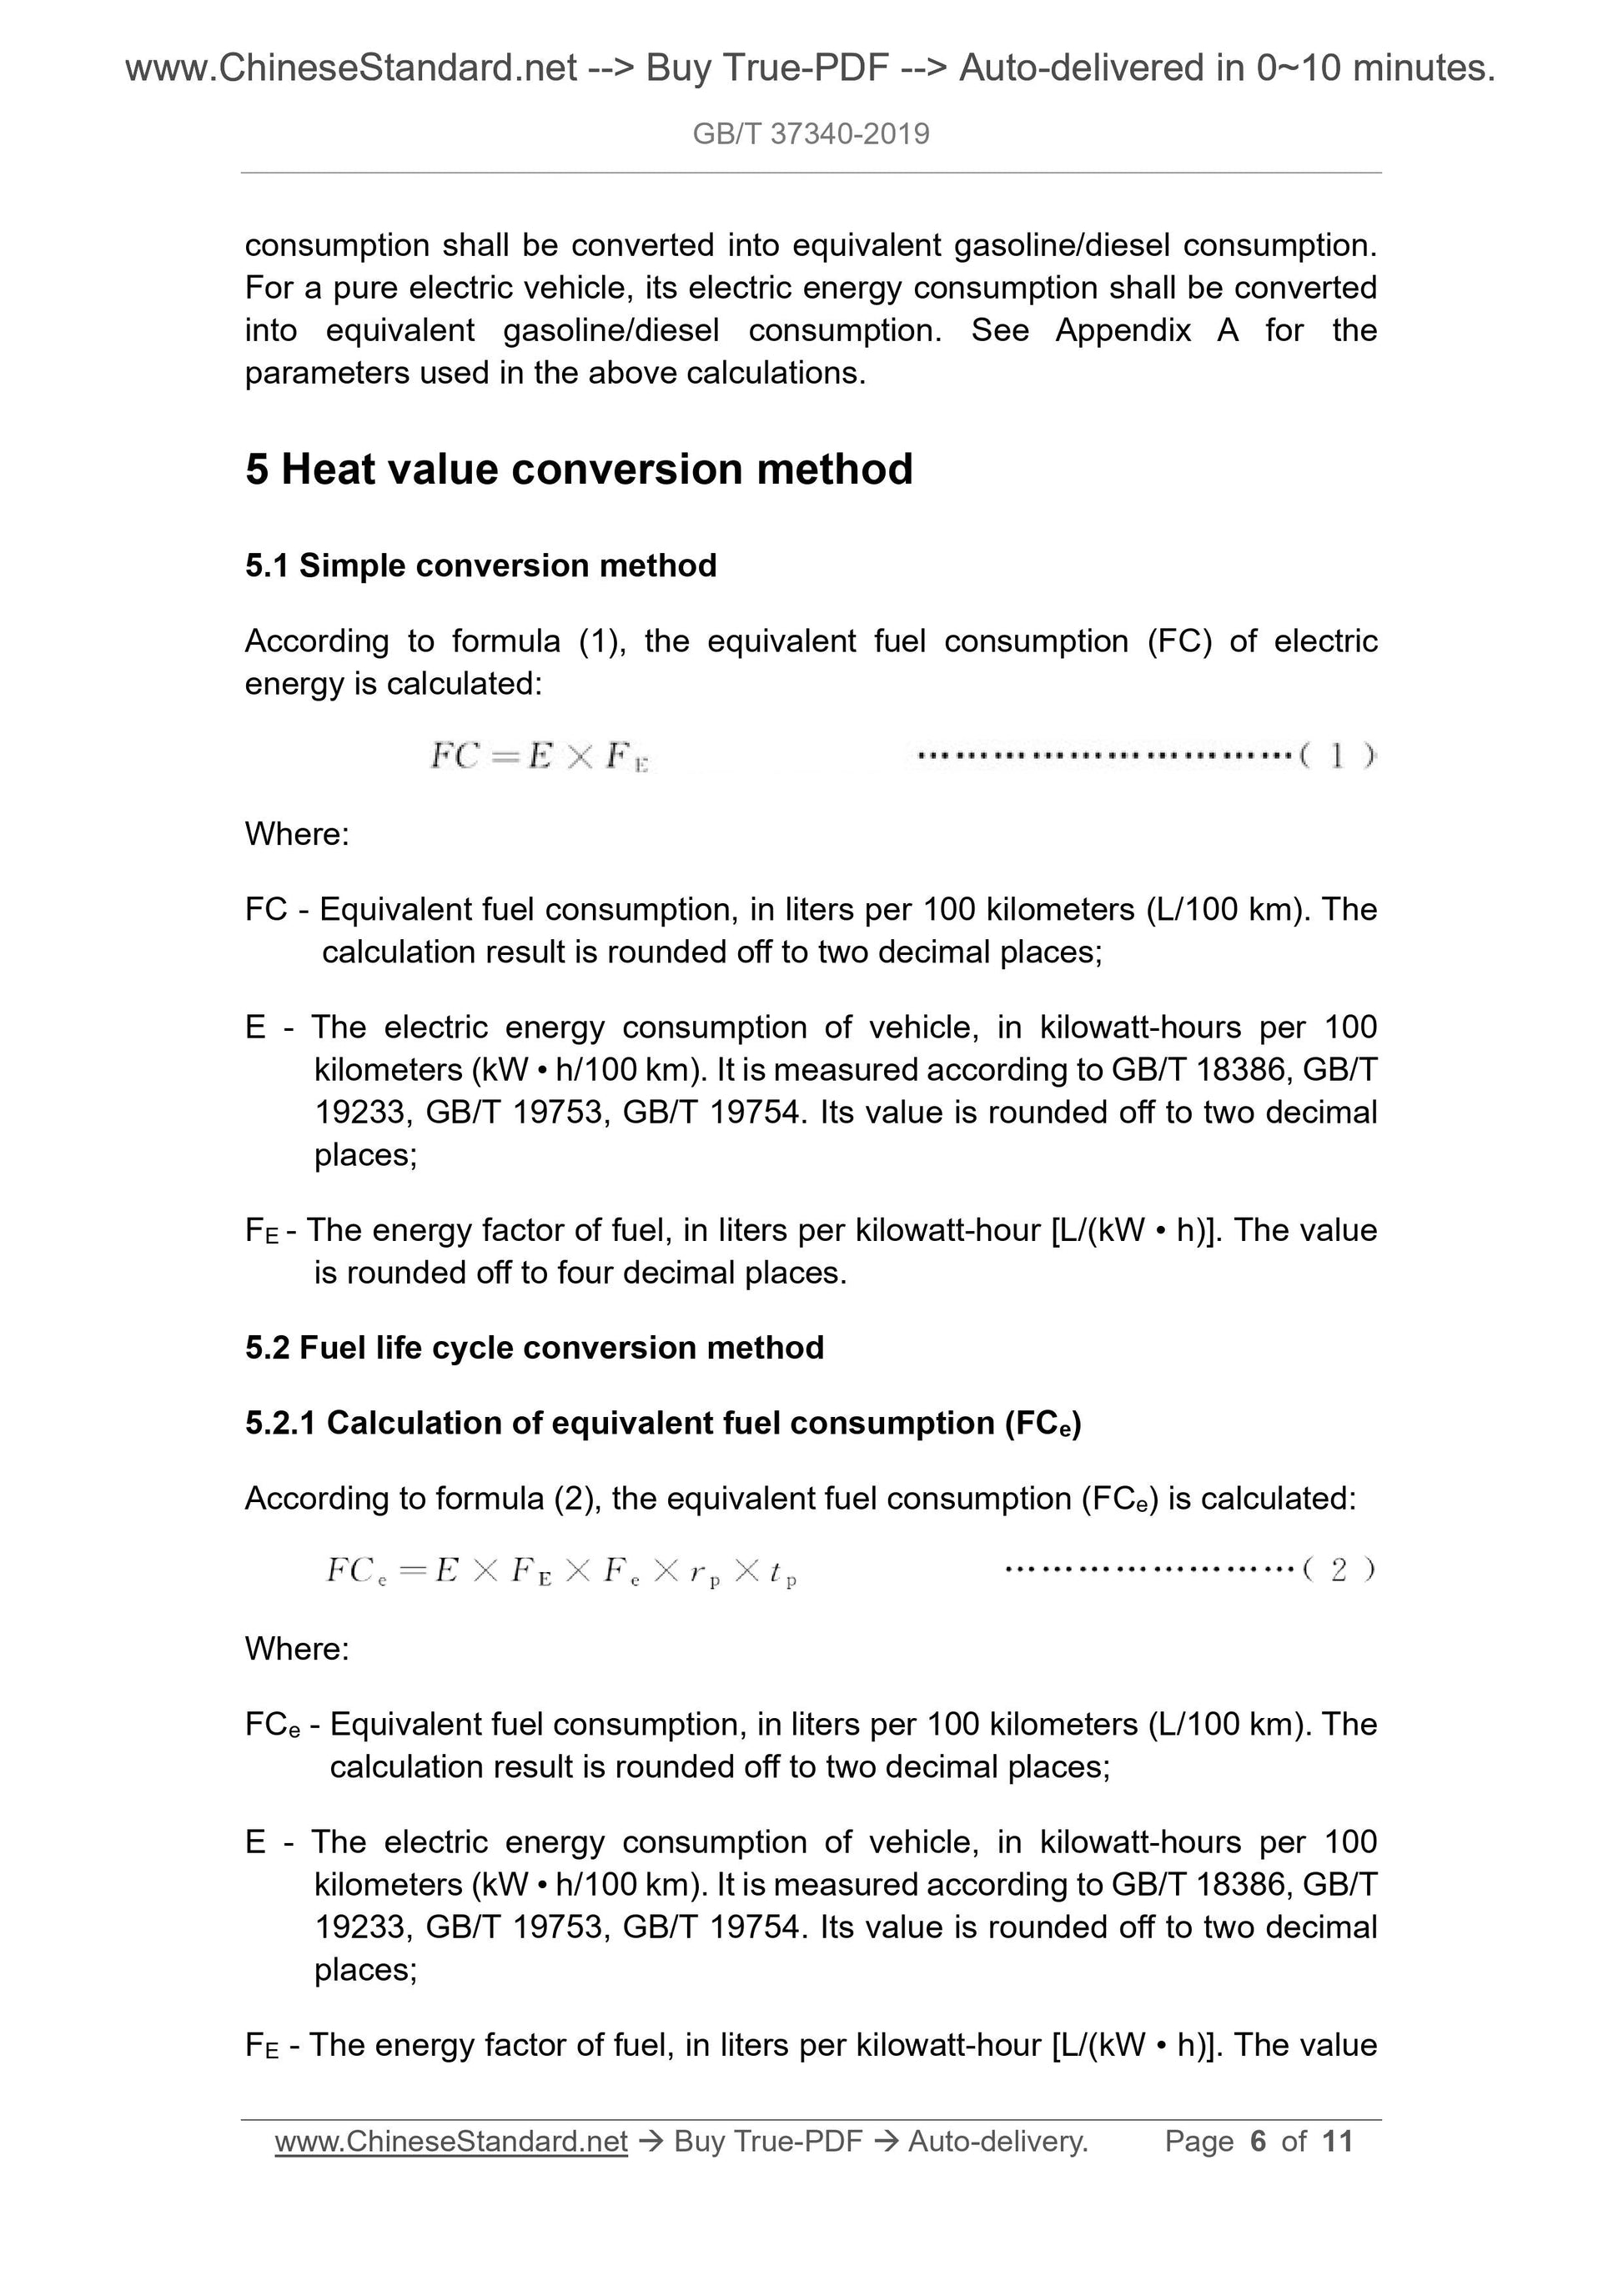 GB/T 37340-2019 Page 4